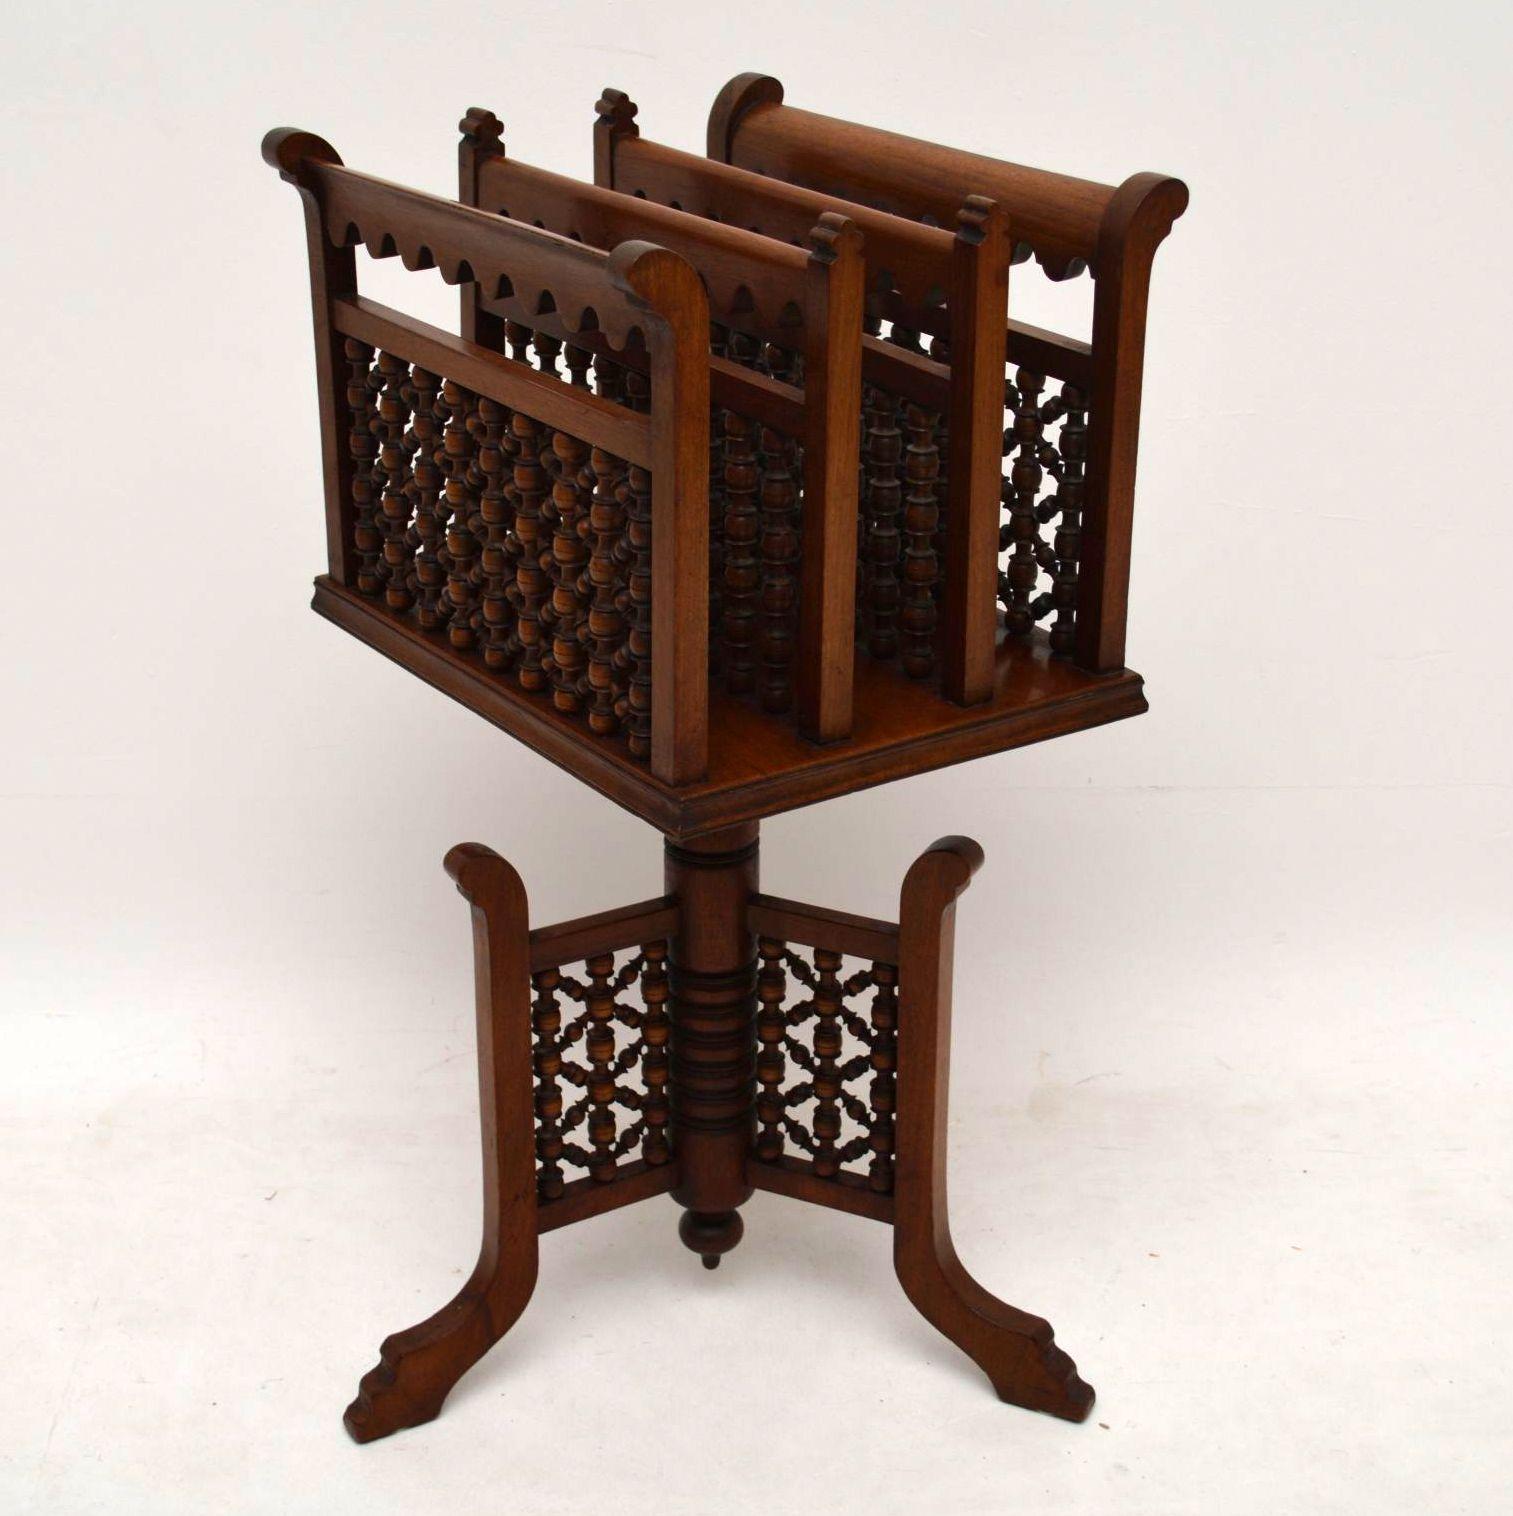 Antique revolving mahogany Canterbury (book or magazine rack), in good original condition and of a very distinct style. It’s 19th century and probably colonial. There are three very decorative compartments on the top section with lots of turned